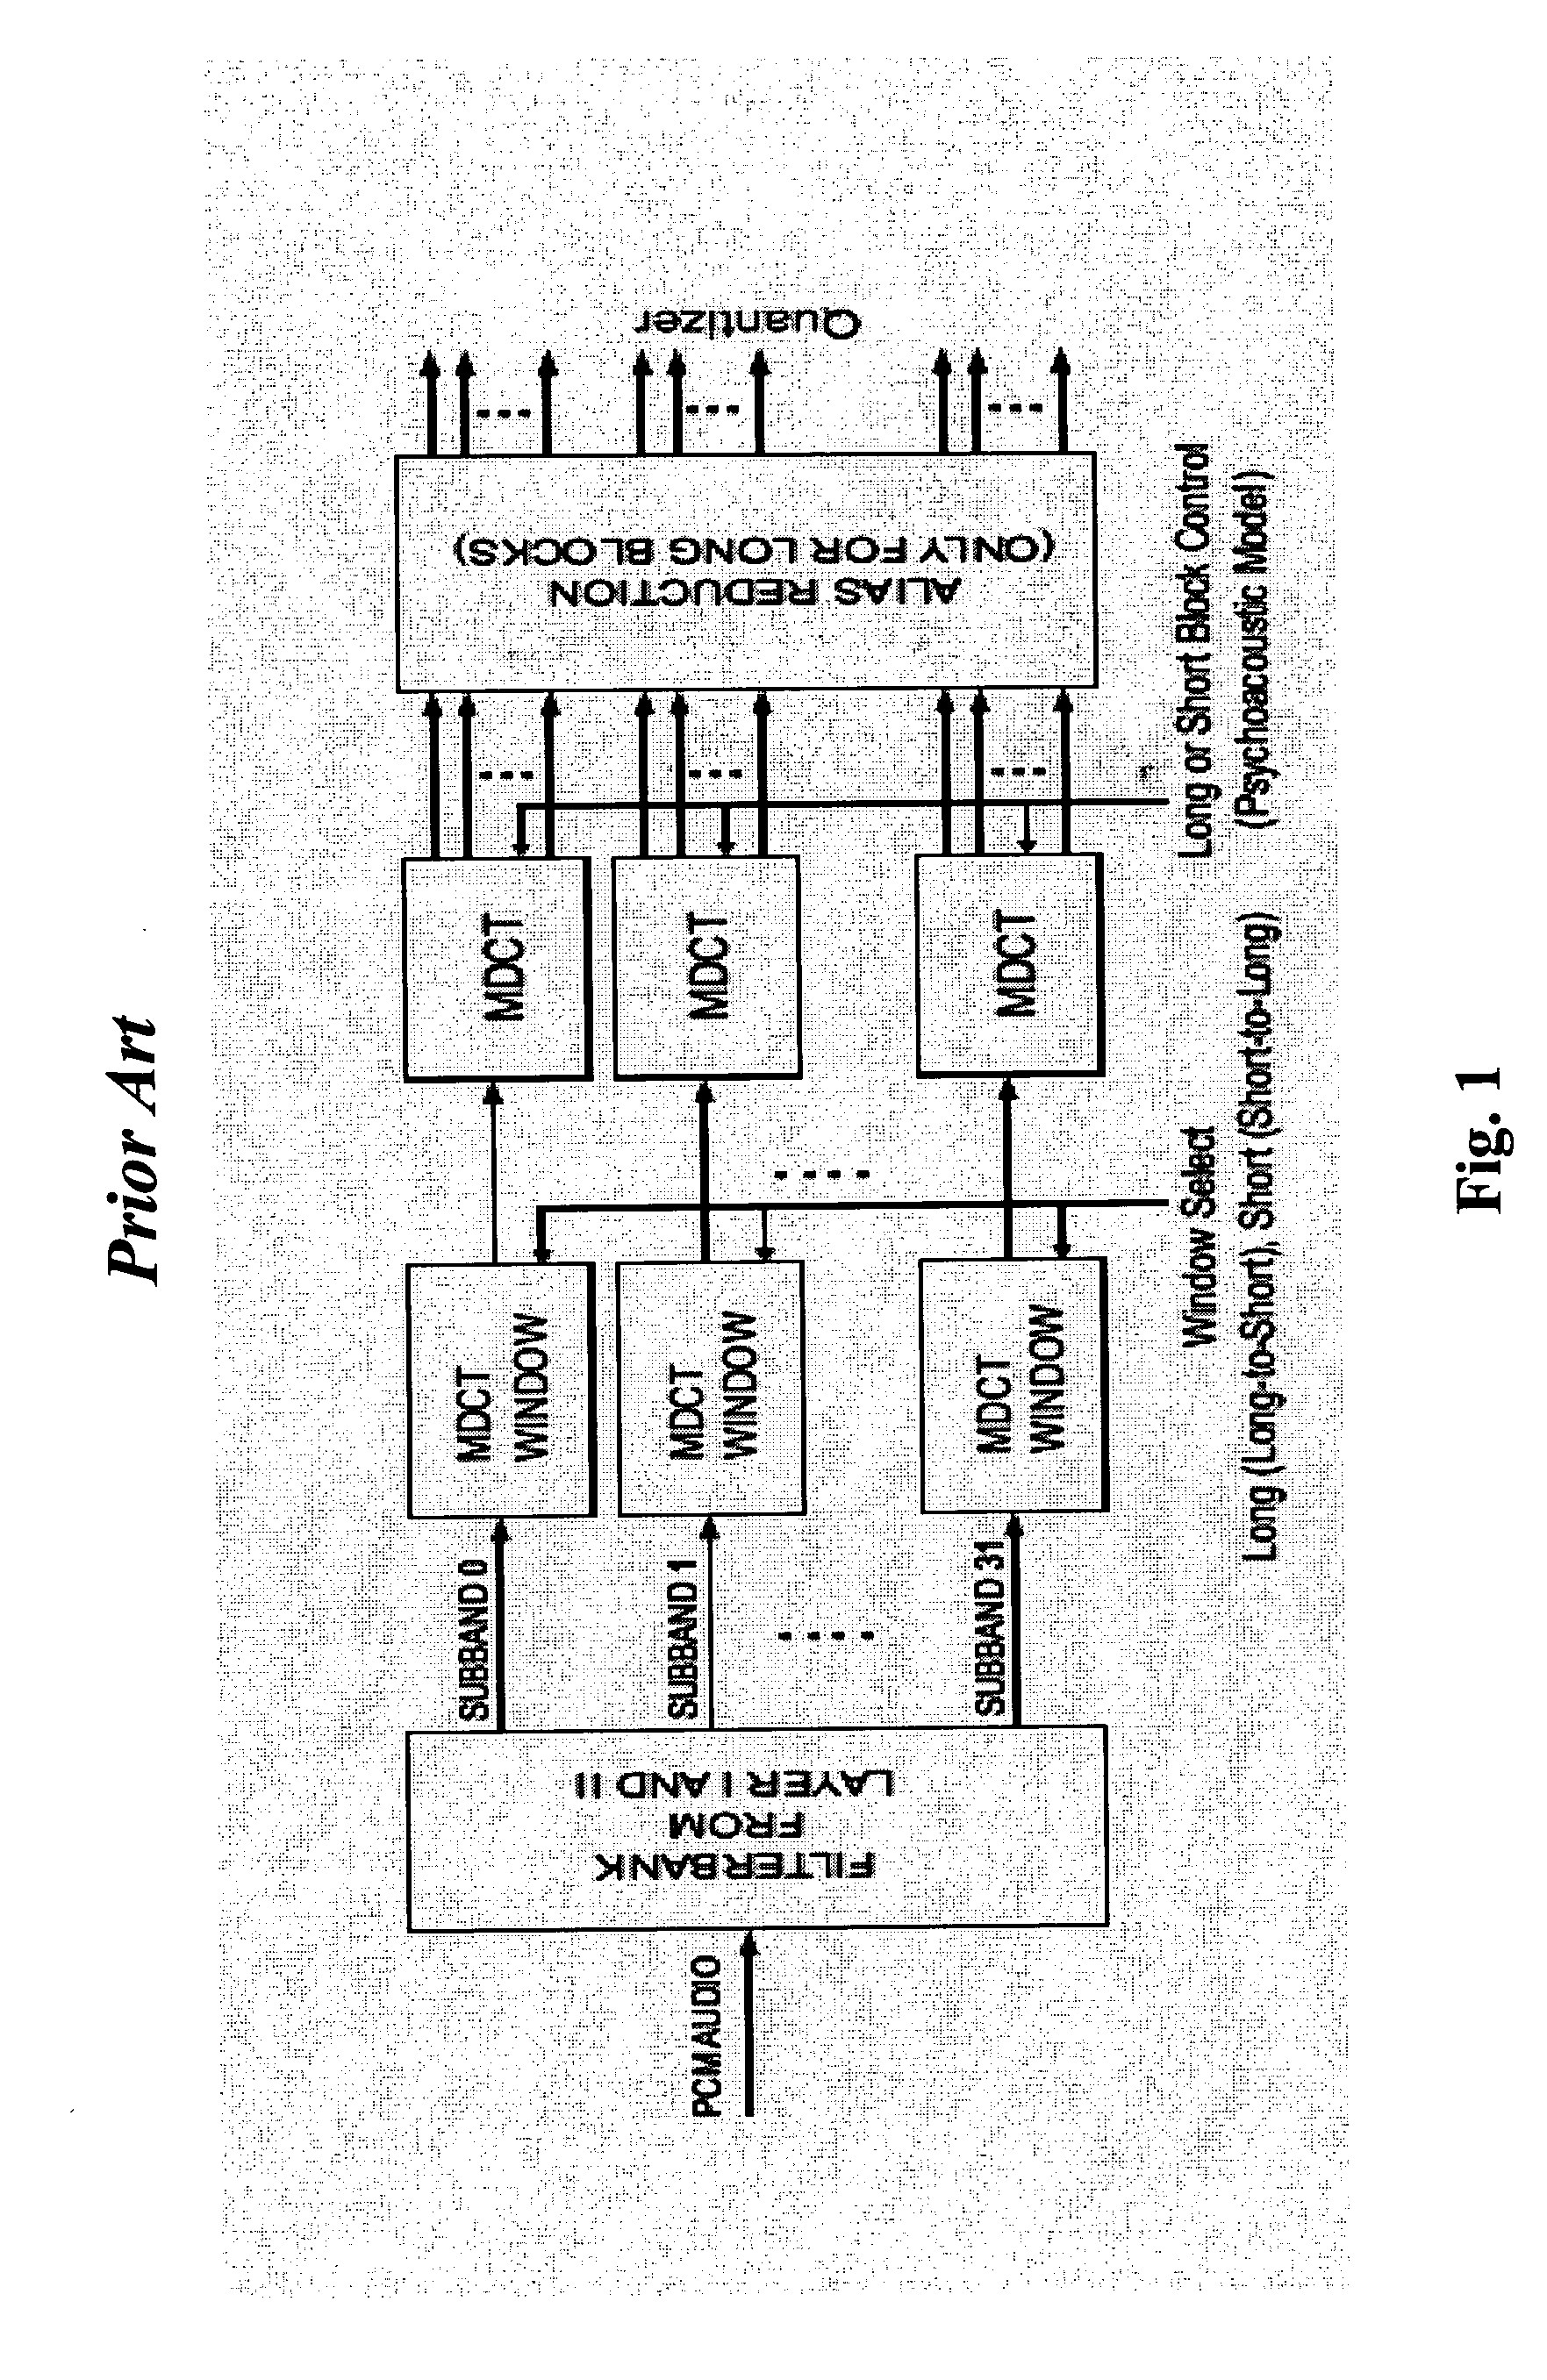 System and method for audio data compression and decompression using discrete wavelet transform (DWT)